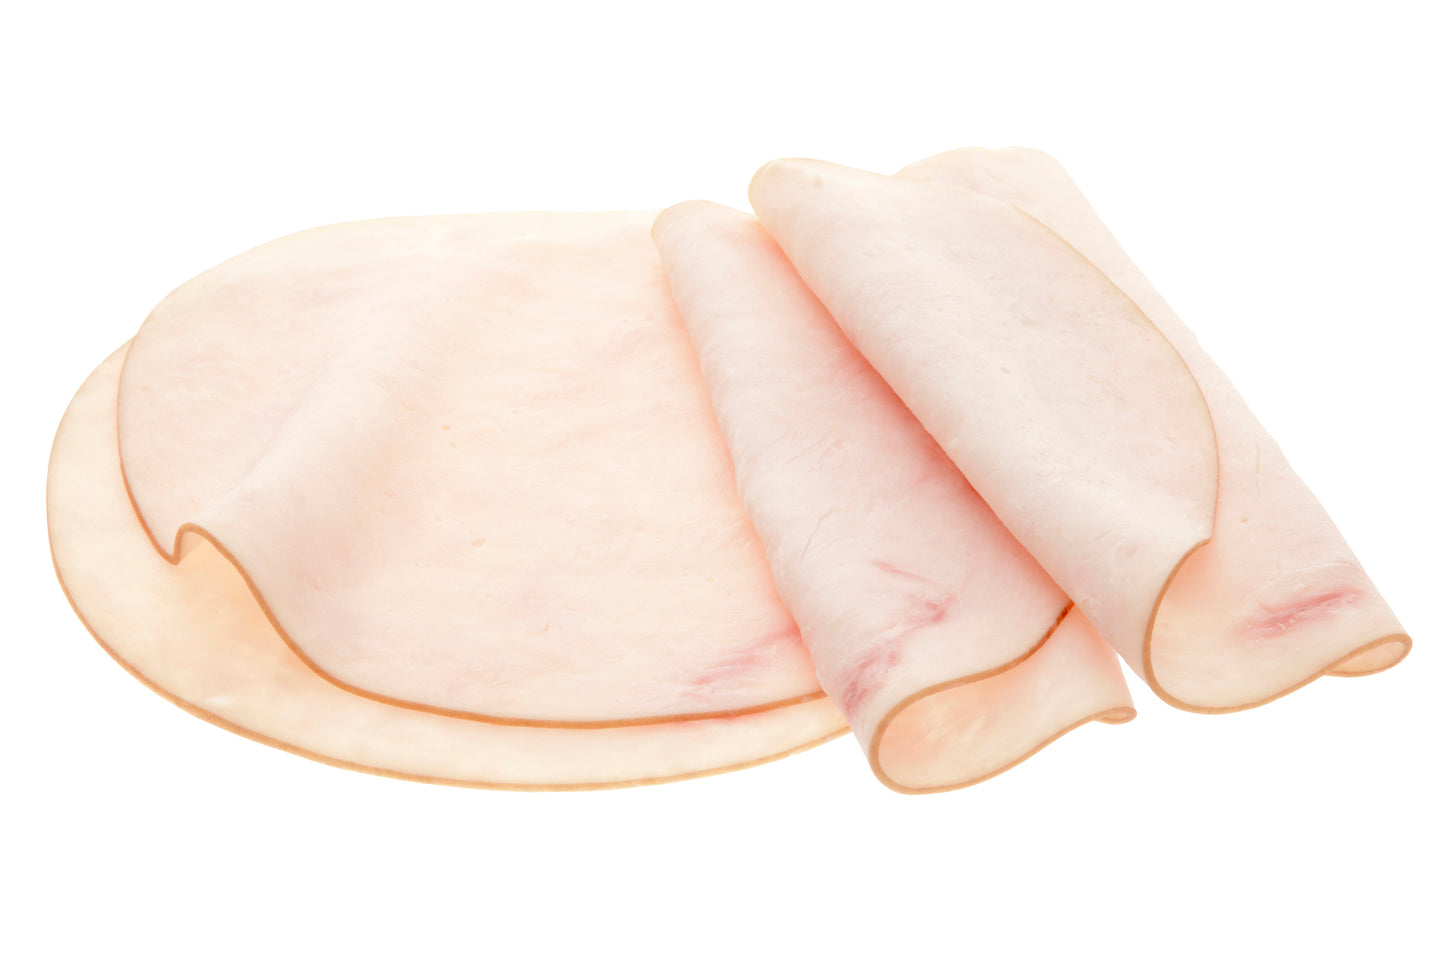 Cooked Meat - Sliced Turkey Breast (500g)